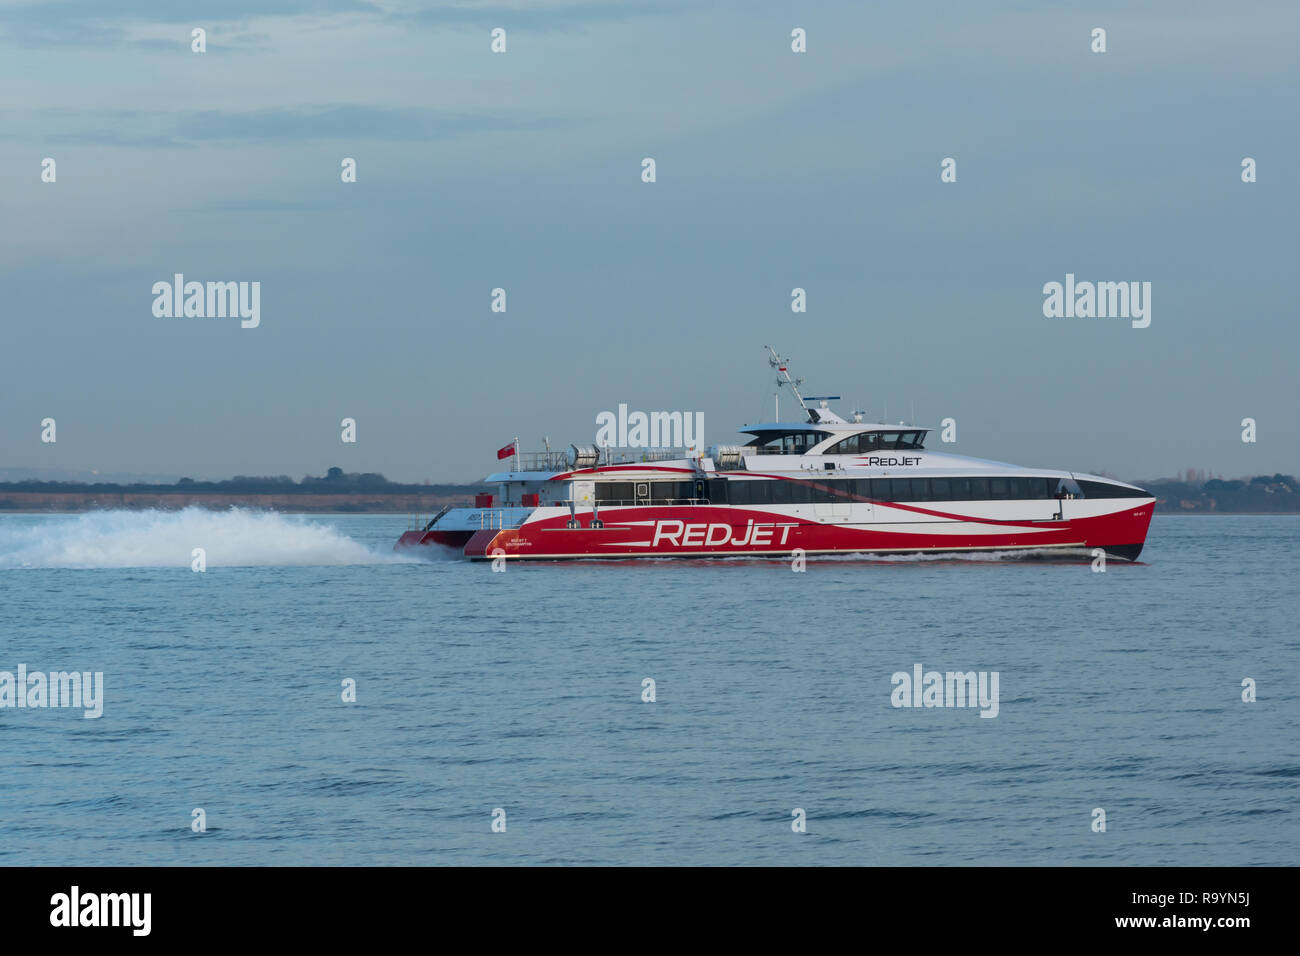 Red jet hi-speed catamaran ferry crossing the Solent between Southampton and West Cowes on the Isle of Wight Stock Photo